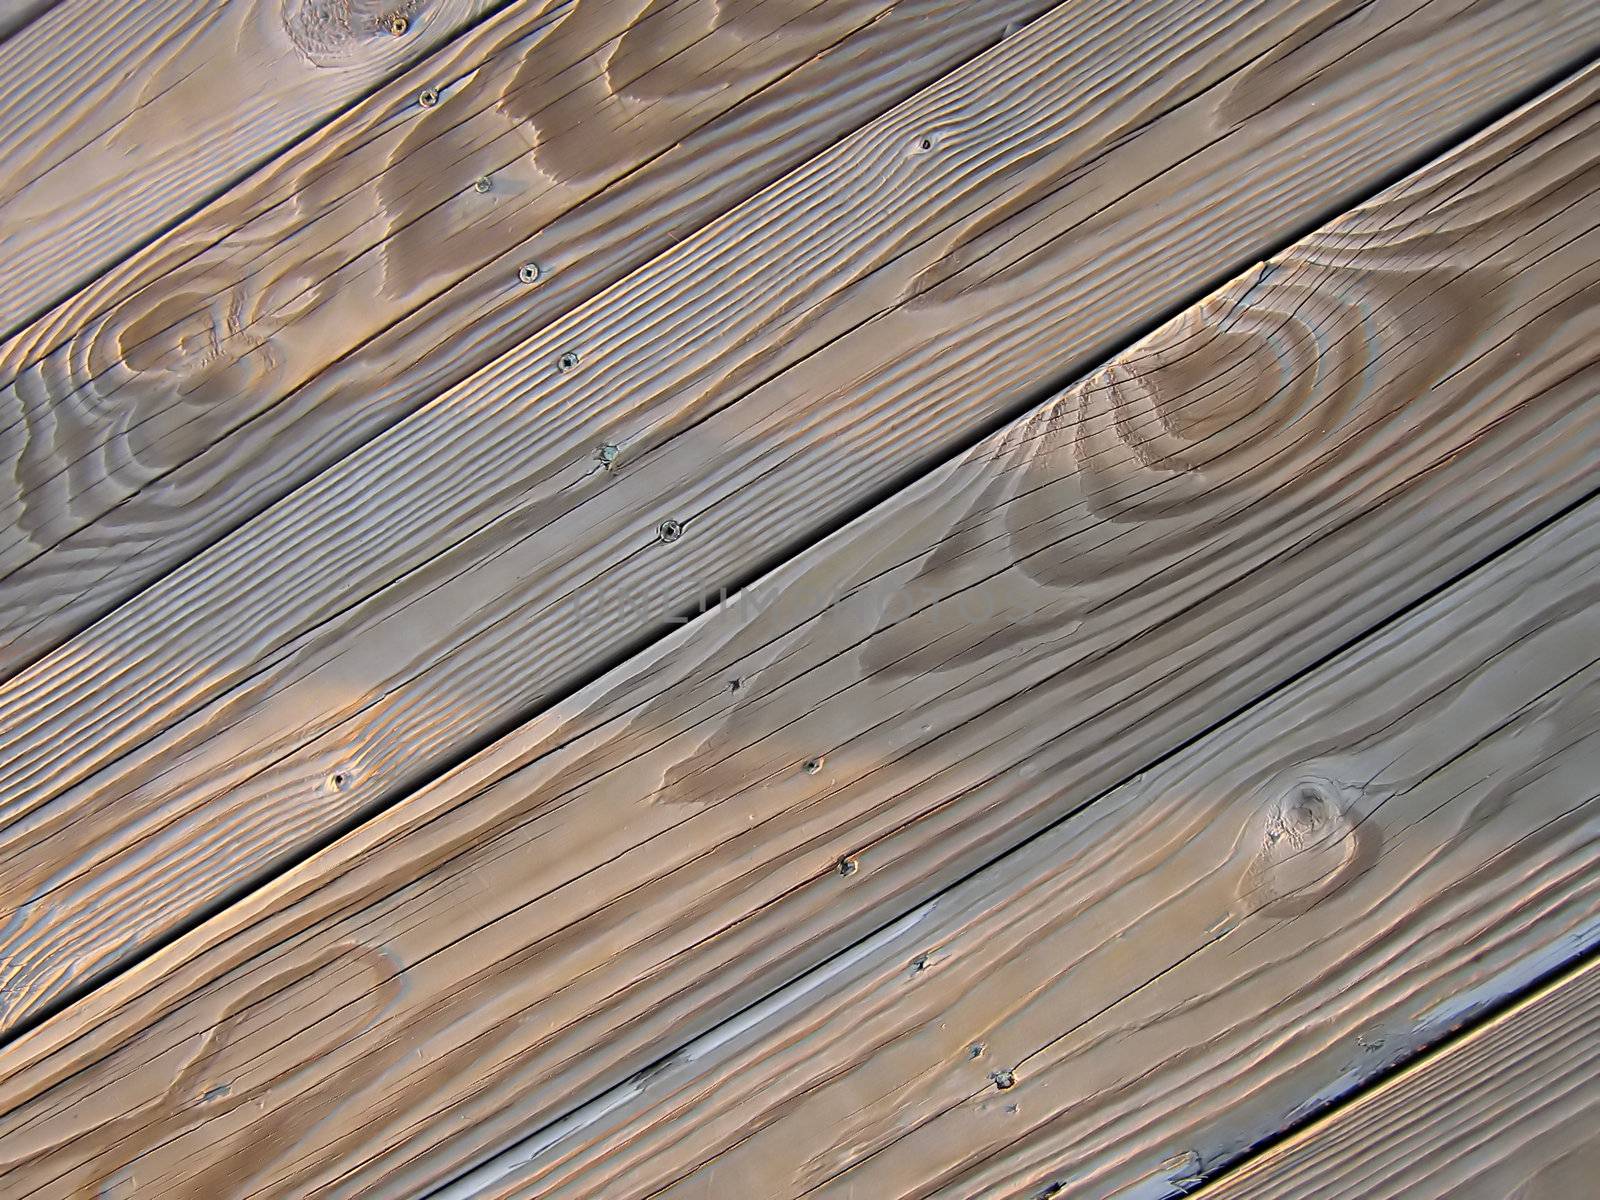 A photograph of wood boards detailing their texture and grain.